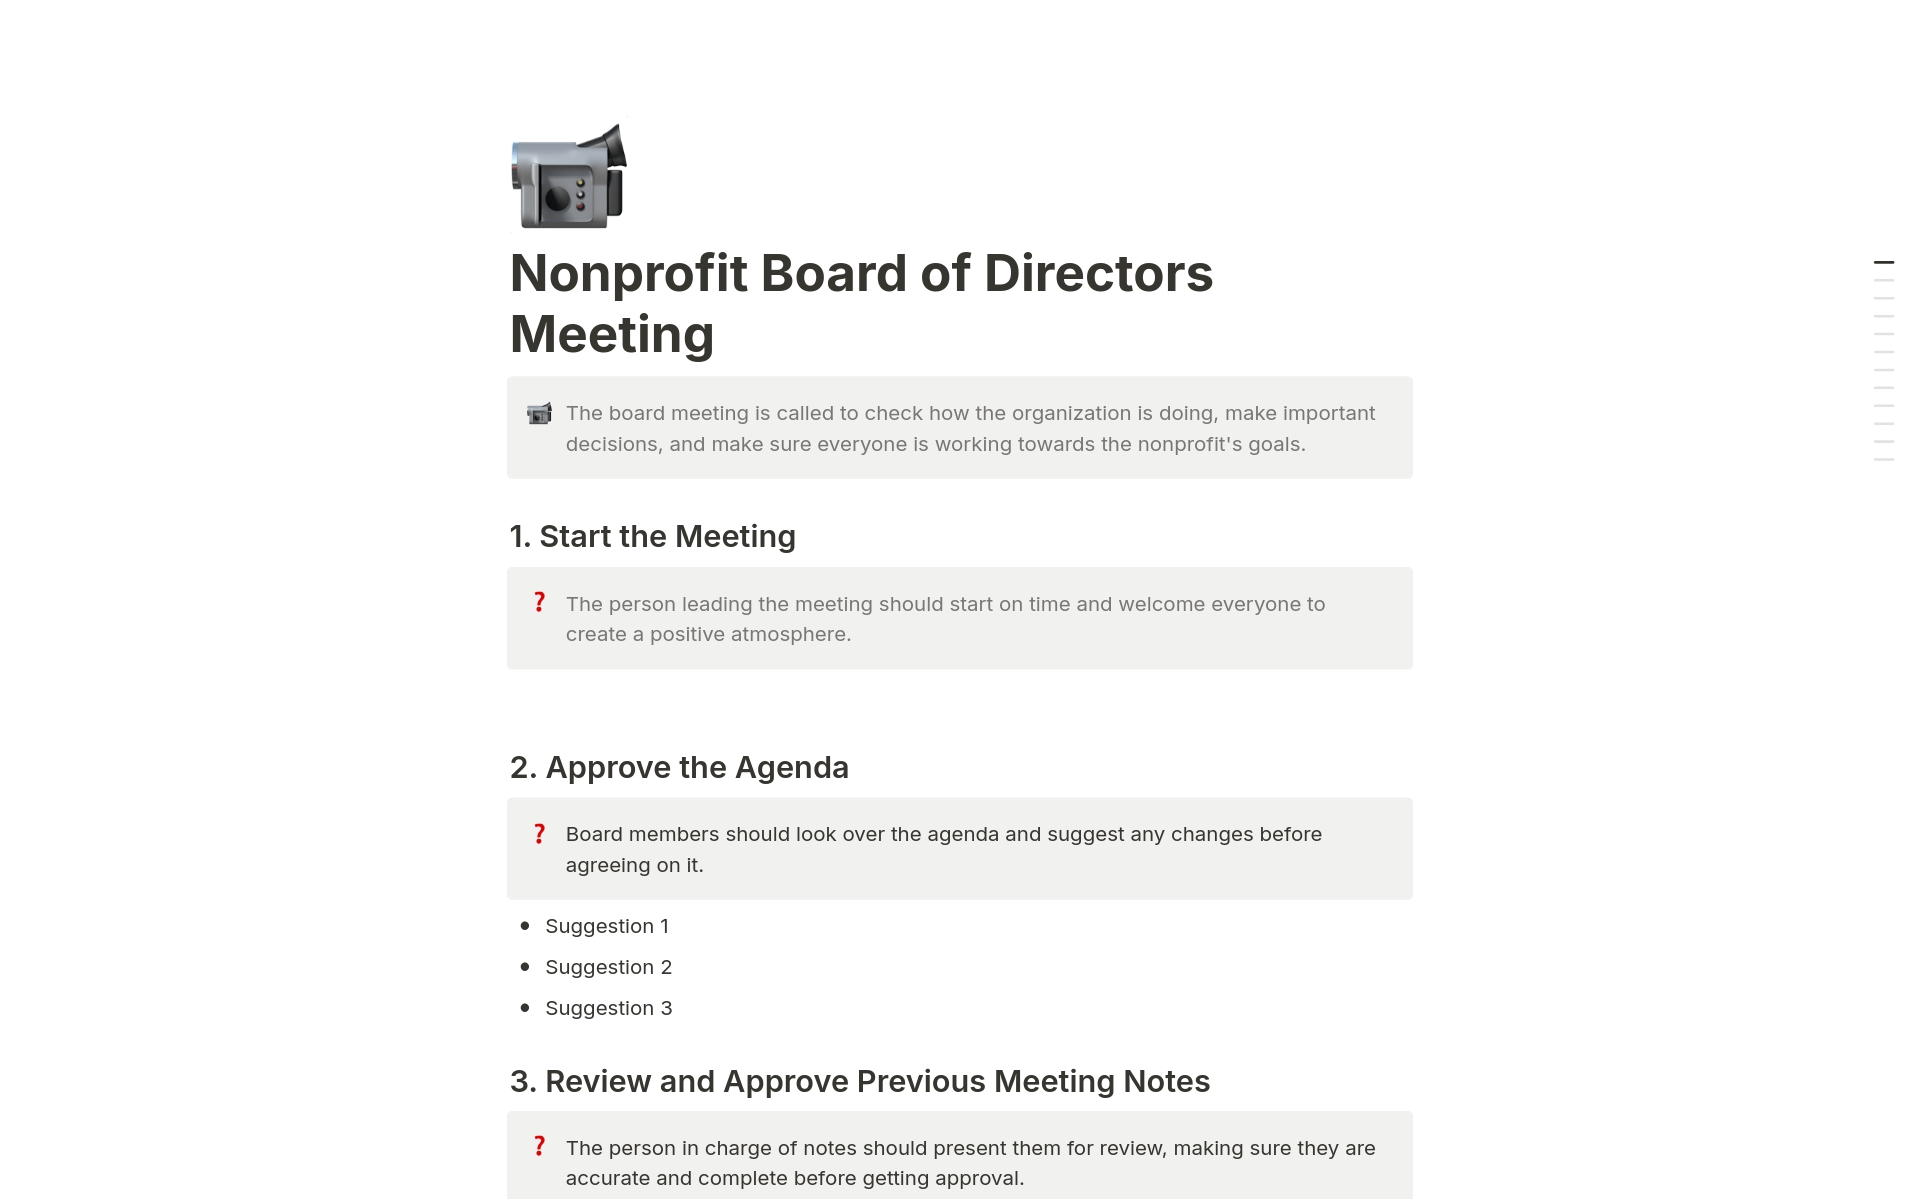 Nonprofit board of directors meetings are ideal for decision-making, planning, and ensuring organizational accountability. Here's a free meeting agenda template just for you.